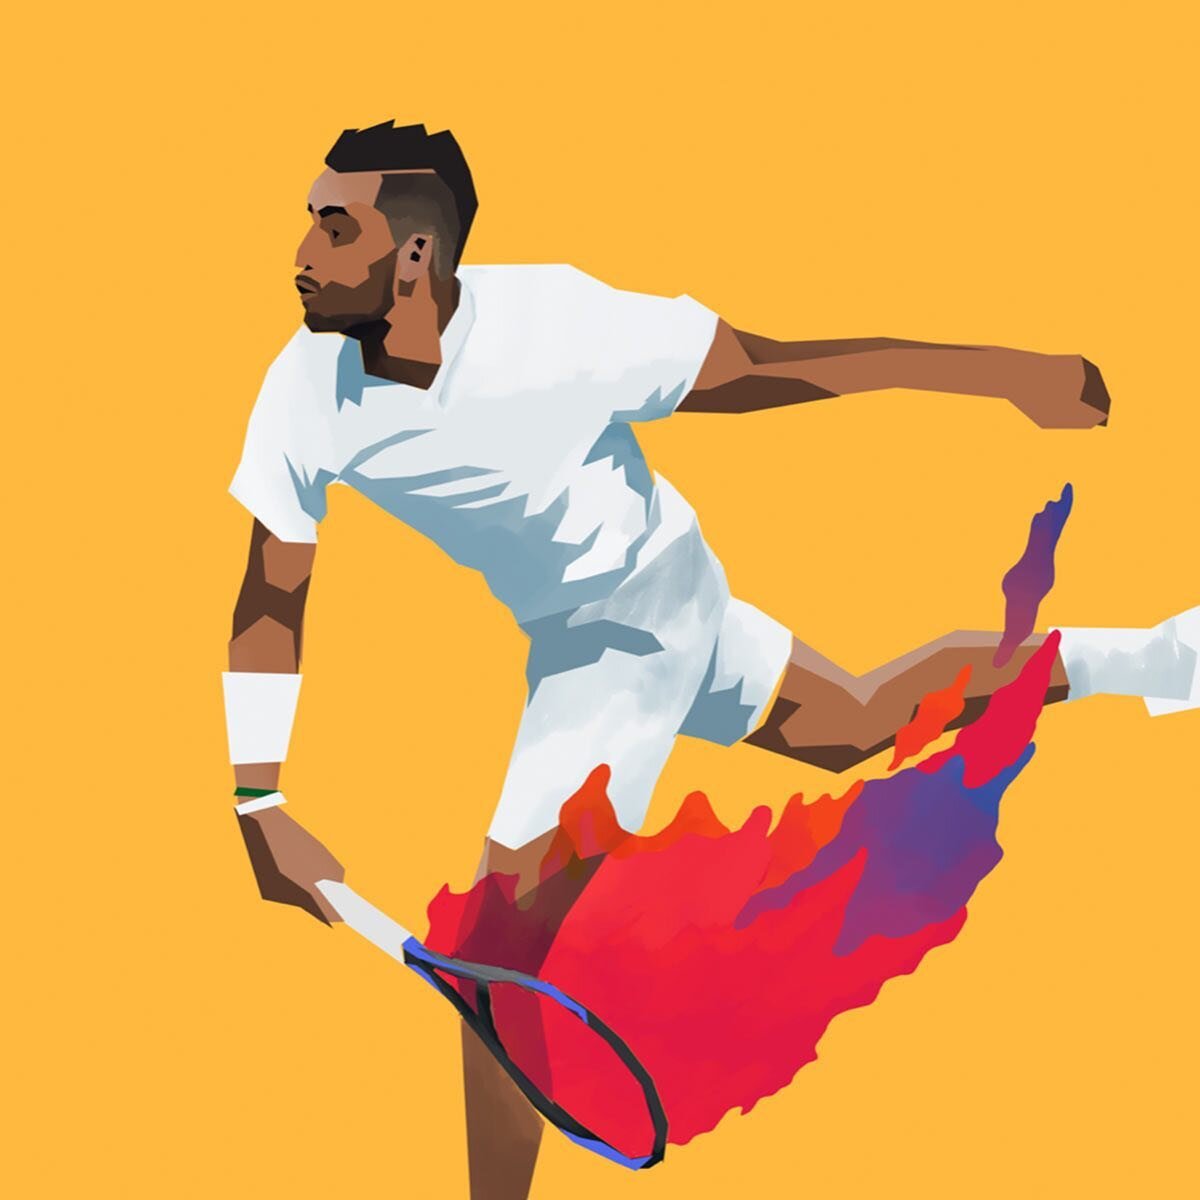 We are loving @shuteillustration vibrant designs! 🎾 What do you think of his work?